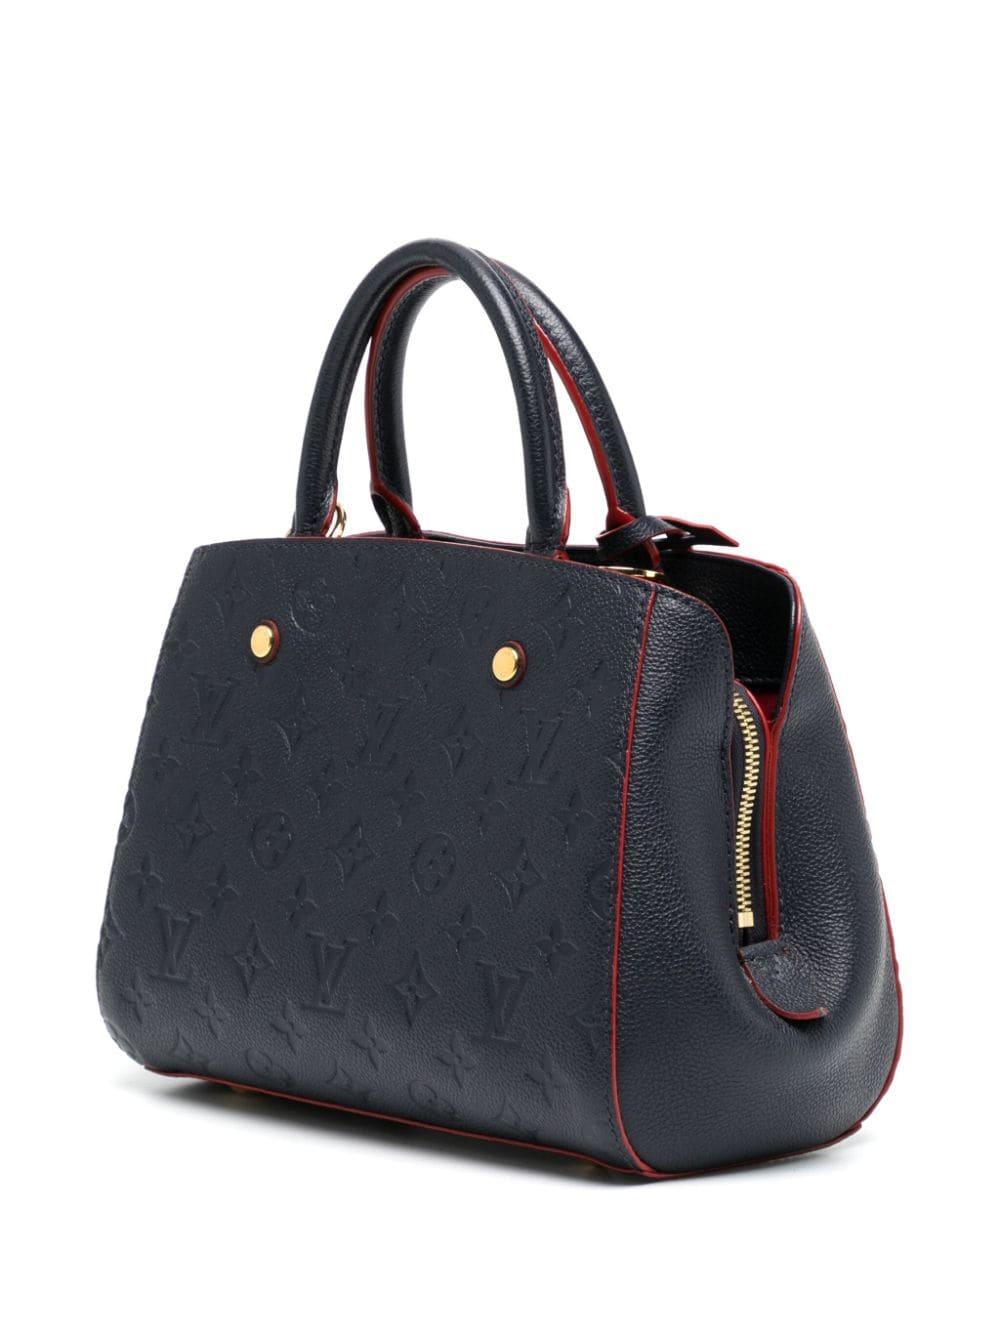 The Montaigne MM is crafted from Louis Vuitton's signature Monogram in navy blue leather. It exudes sophistication and is designed to withstand the test of time. The bag features a structured and spacious silhouette, making it suitable for